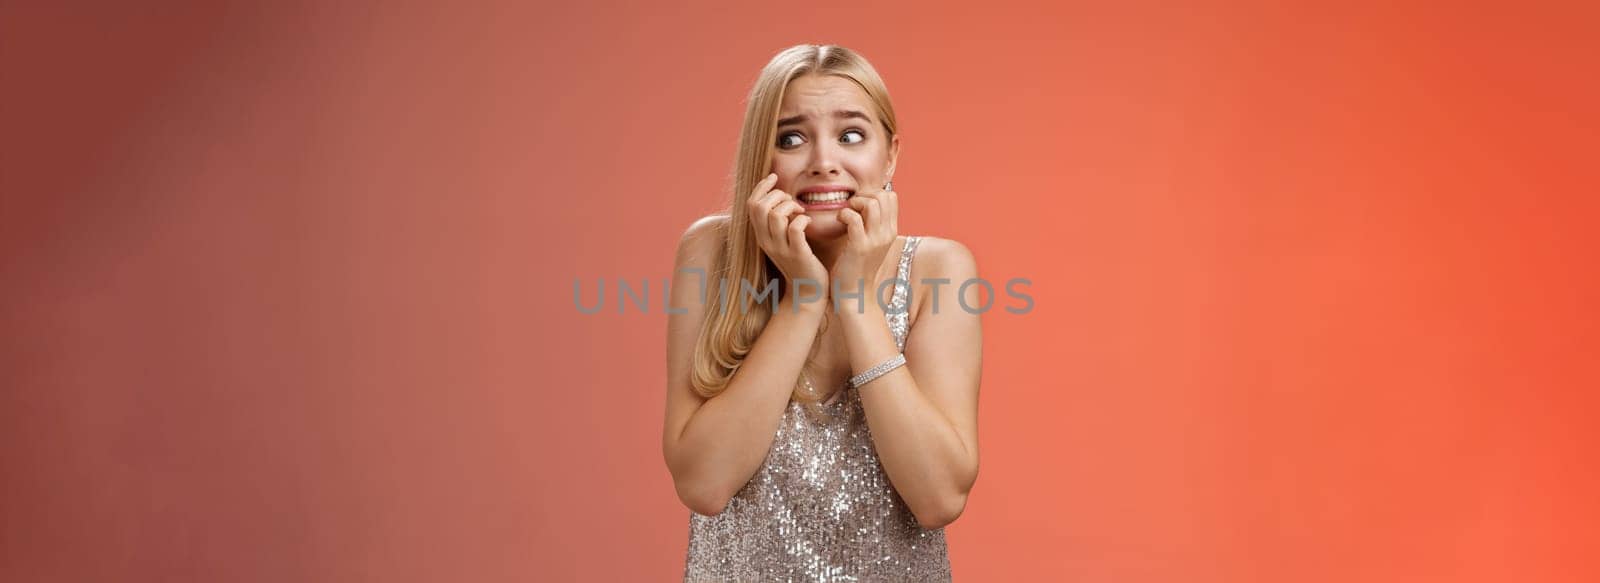 Lifestyle. Frightened insecure timid young blond woman afraid feel scared trembling fear stooping biting nails pop eyes right standing horrified red background wear silver evening dress terrified.